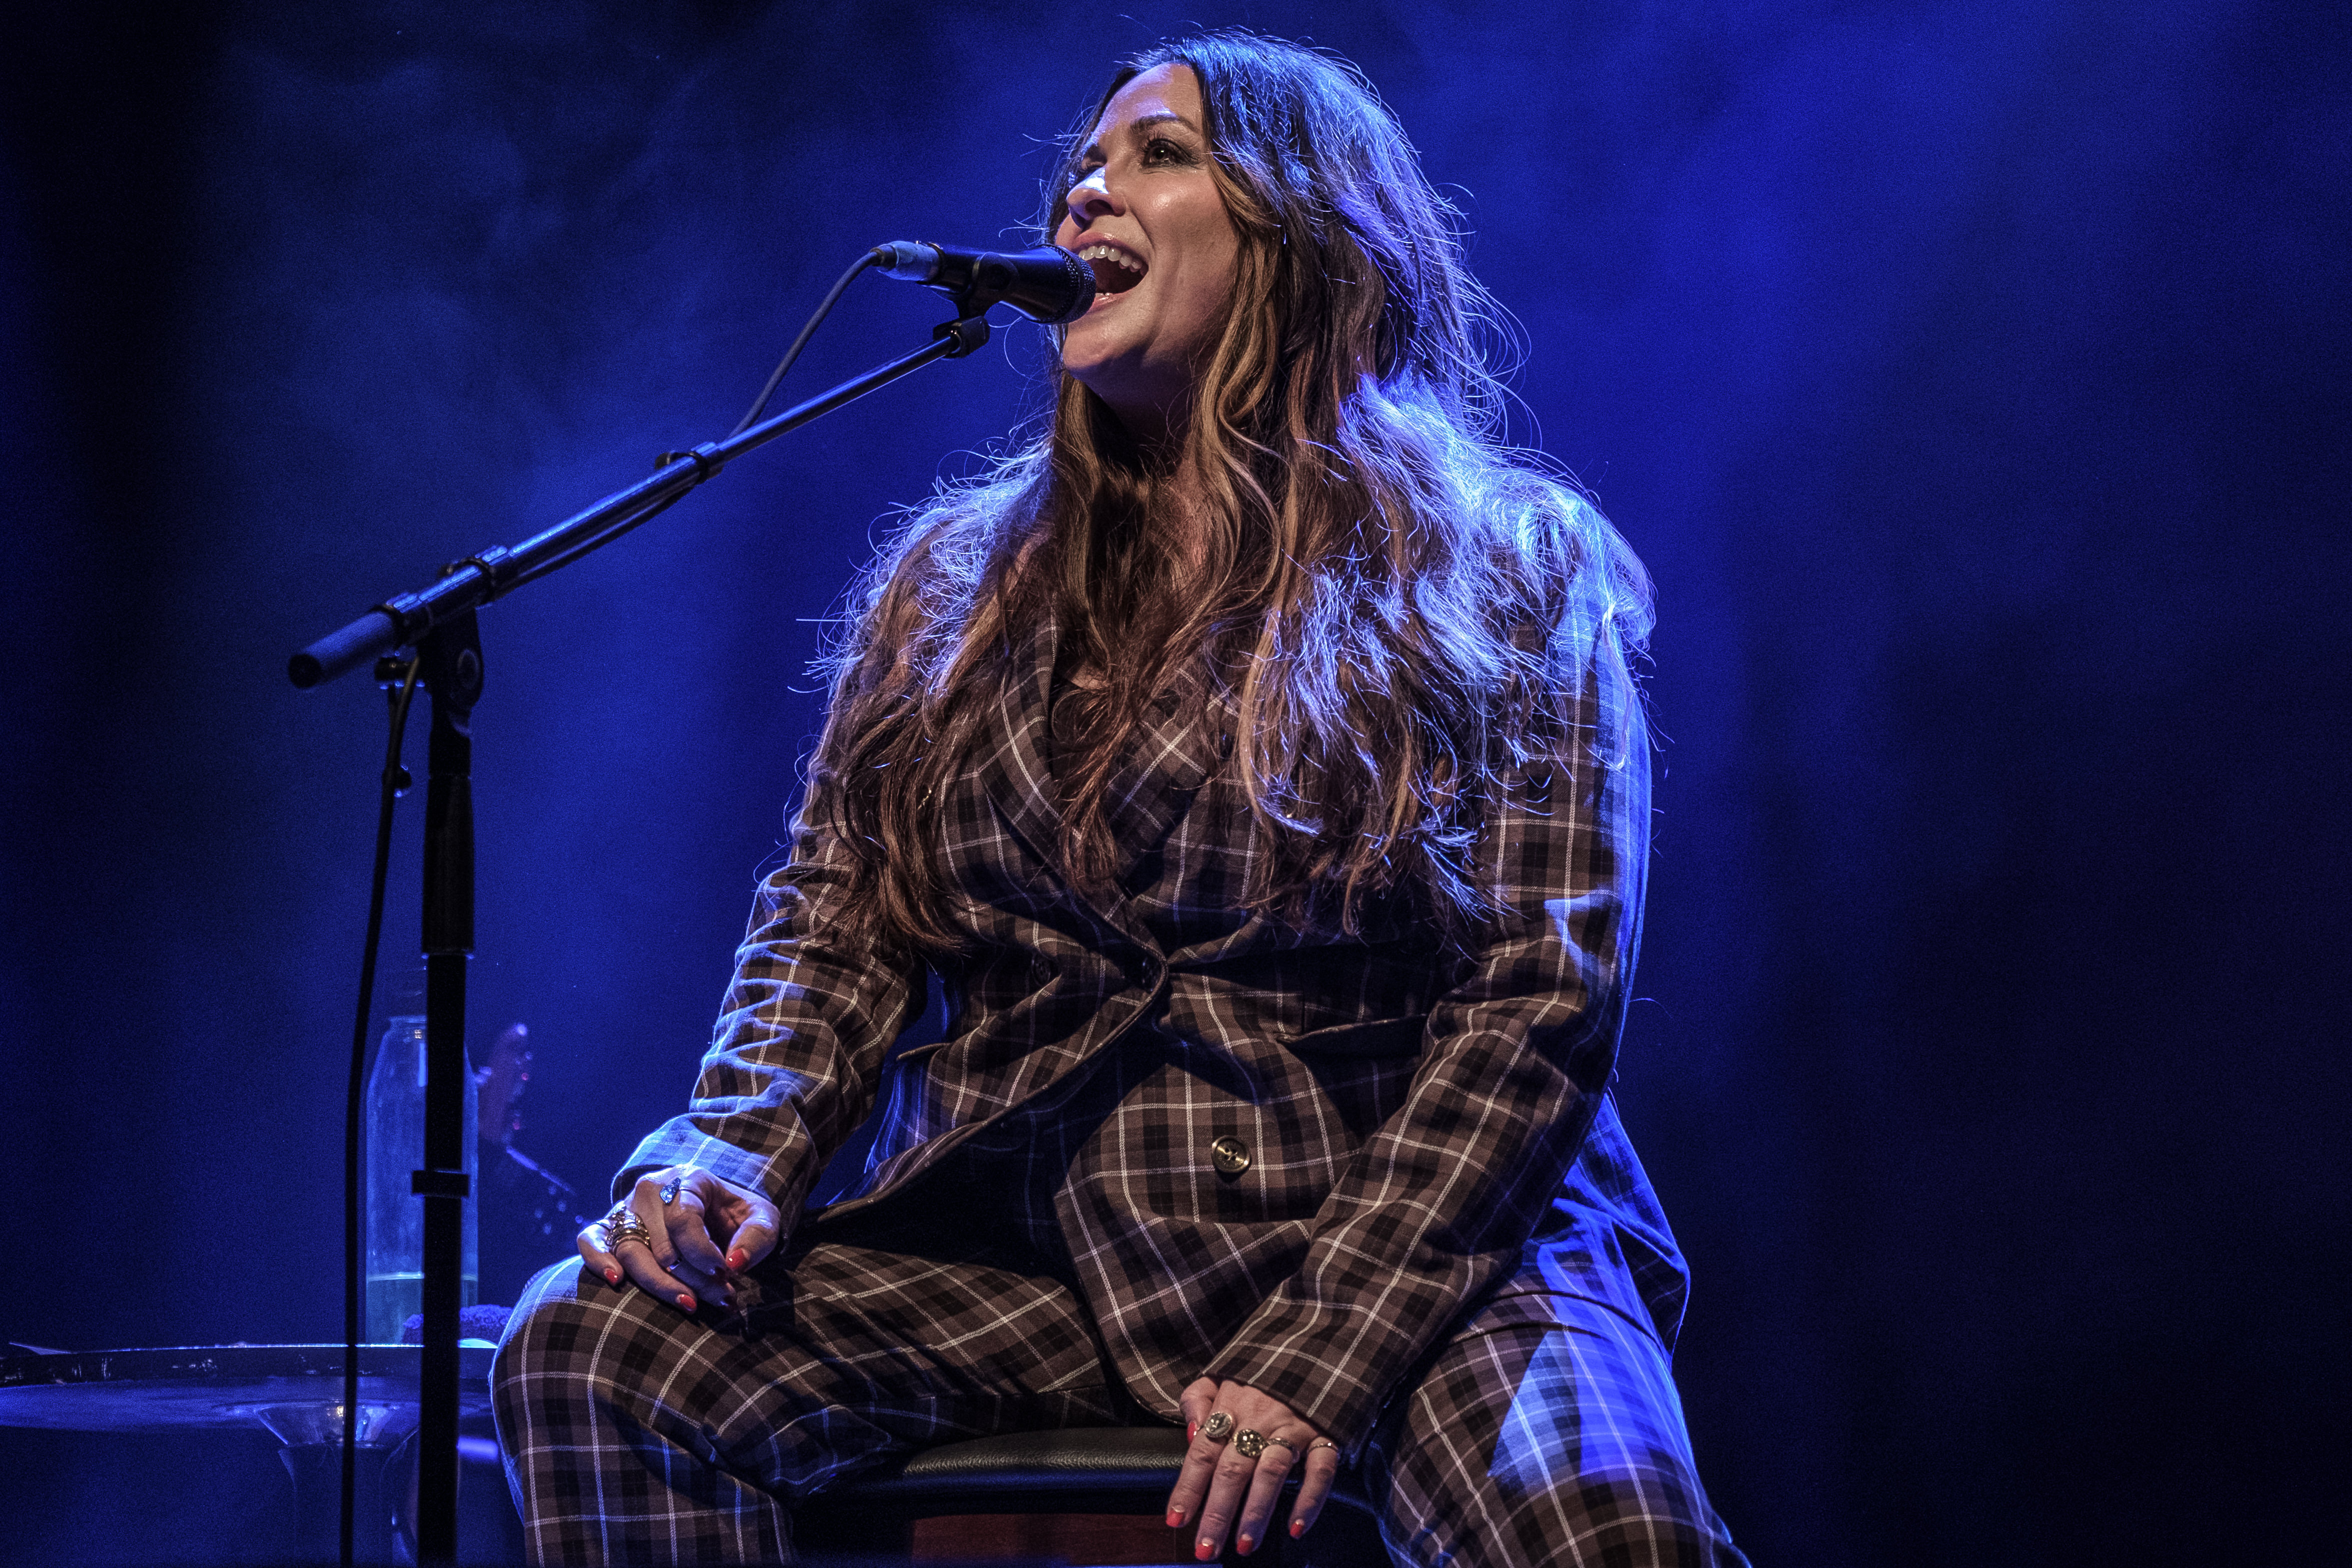 Alanis Morissette wants nothing to do with ‘Jagged’ HBO doc about her life, career